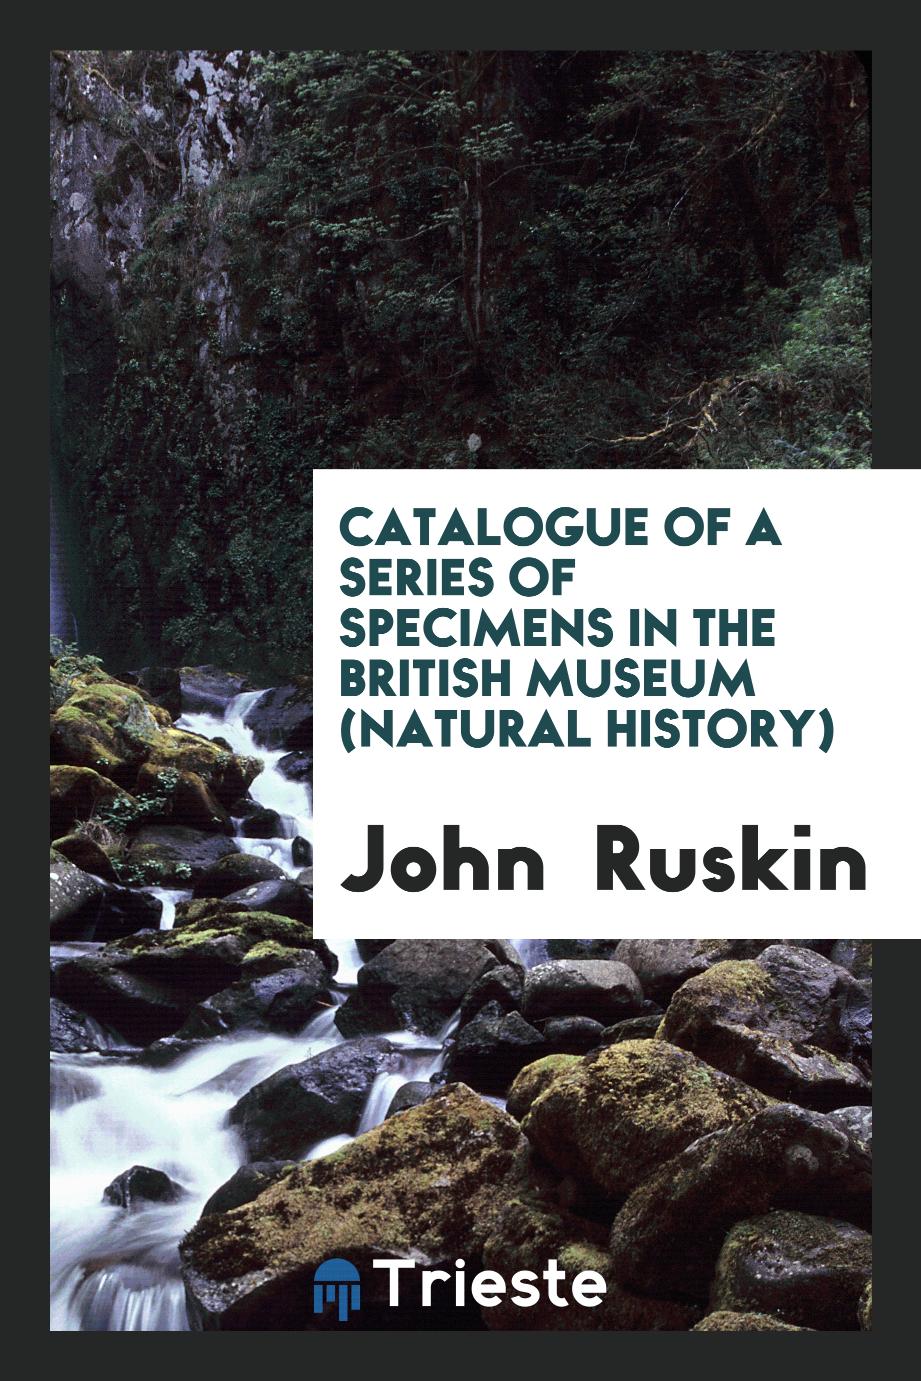 Catalogue of a Series of Specimens in the British Museum (Natural History)